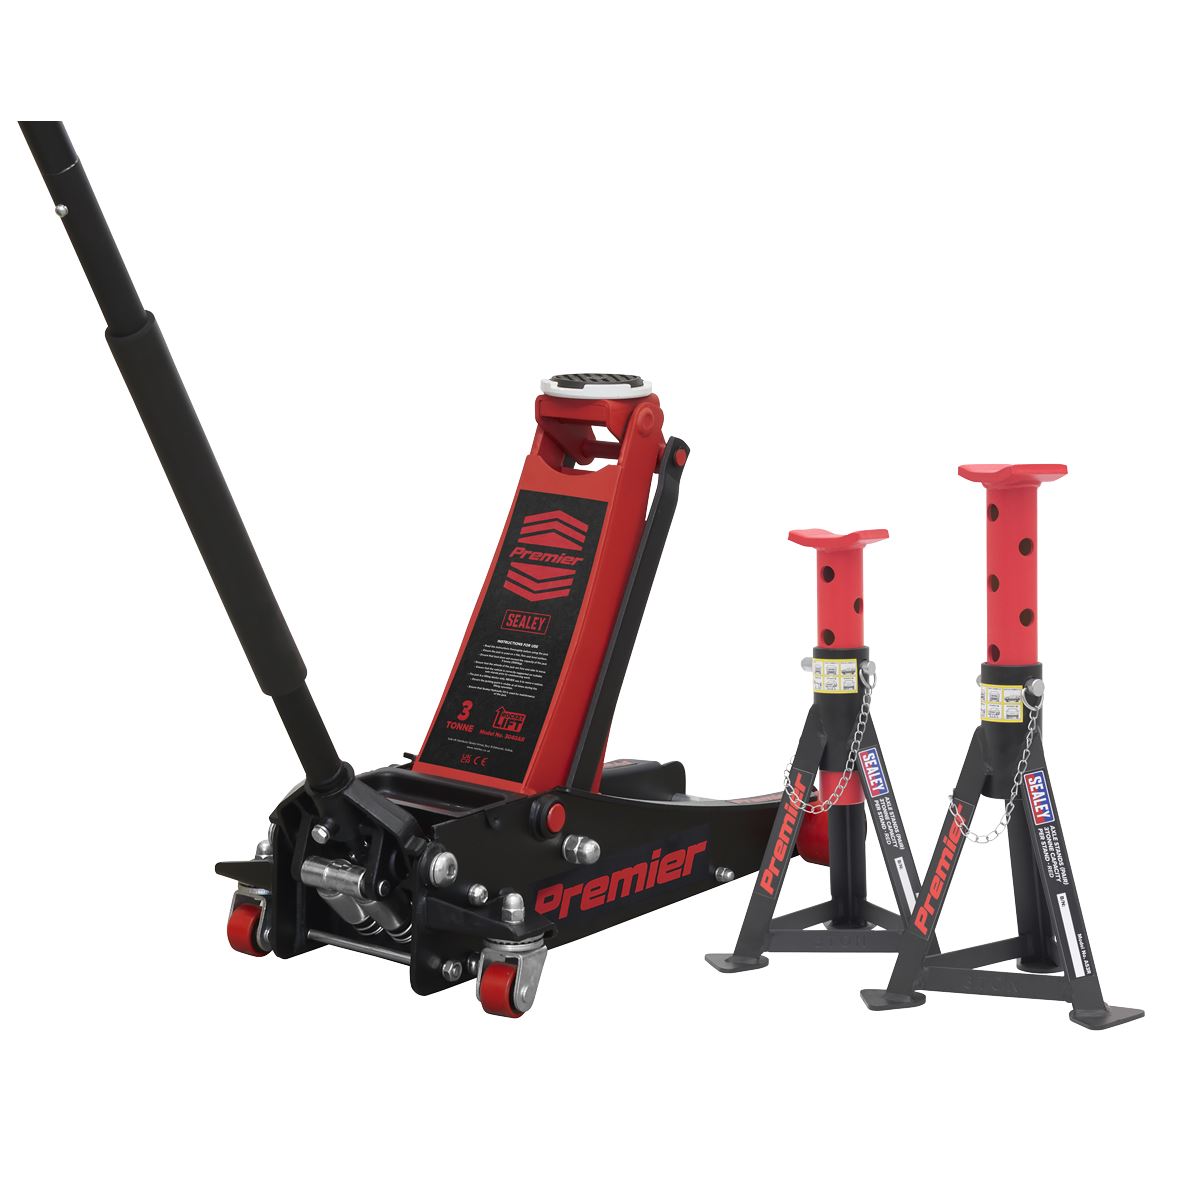 Sealey Premier Trolley Jack 3 Tonne & Axle Stands (Pair) 3 Tonne per Stand Combo